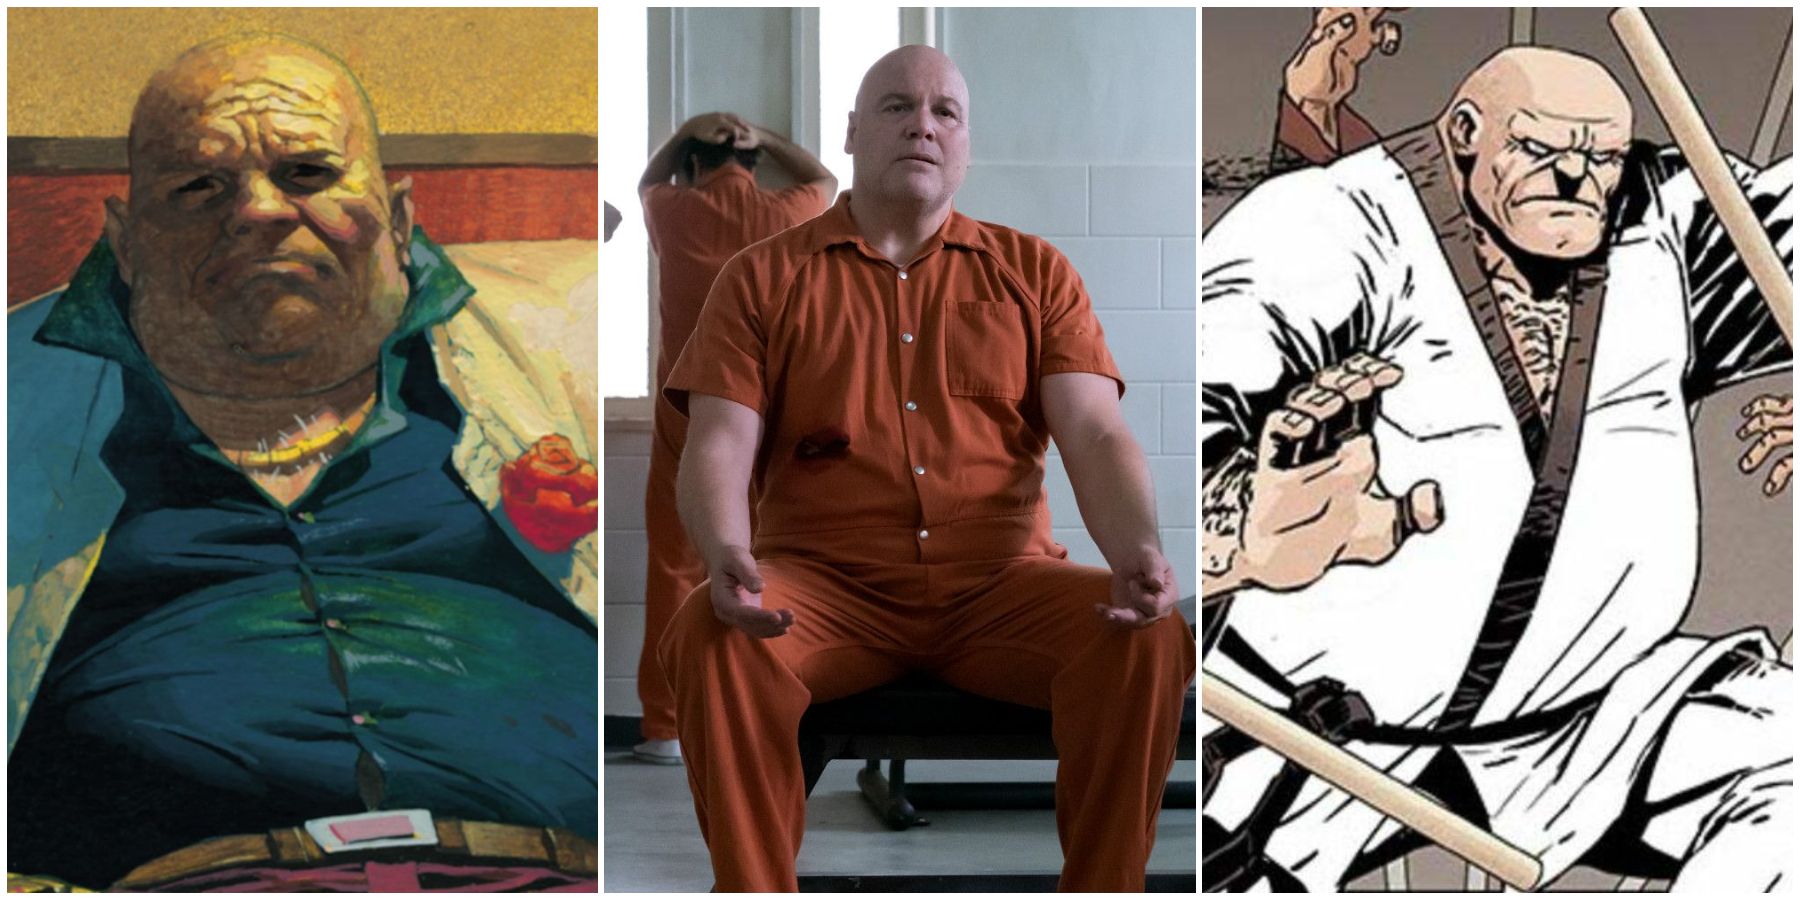 marvel: powers kingpin has in the comics